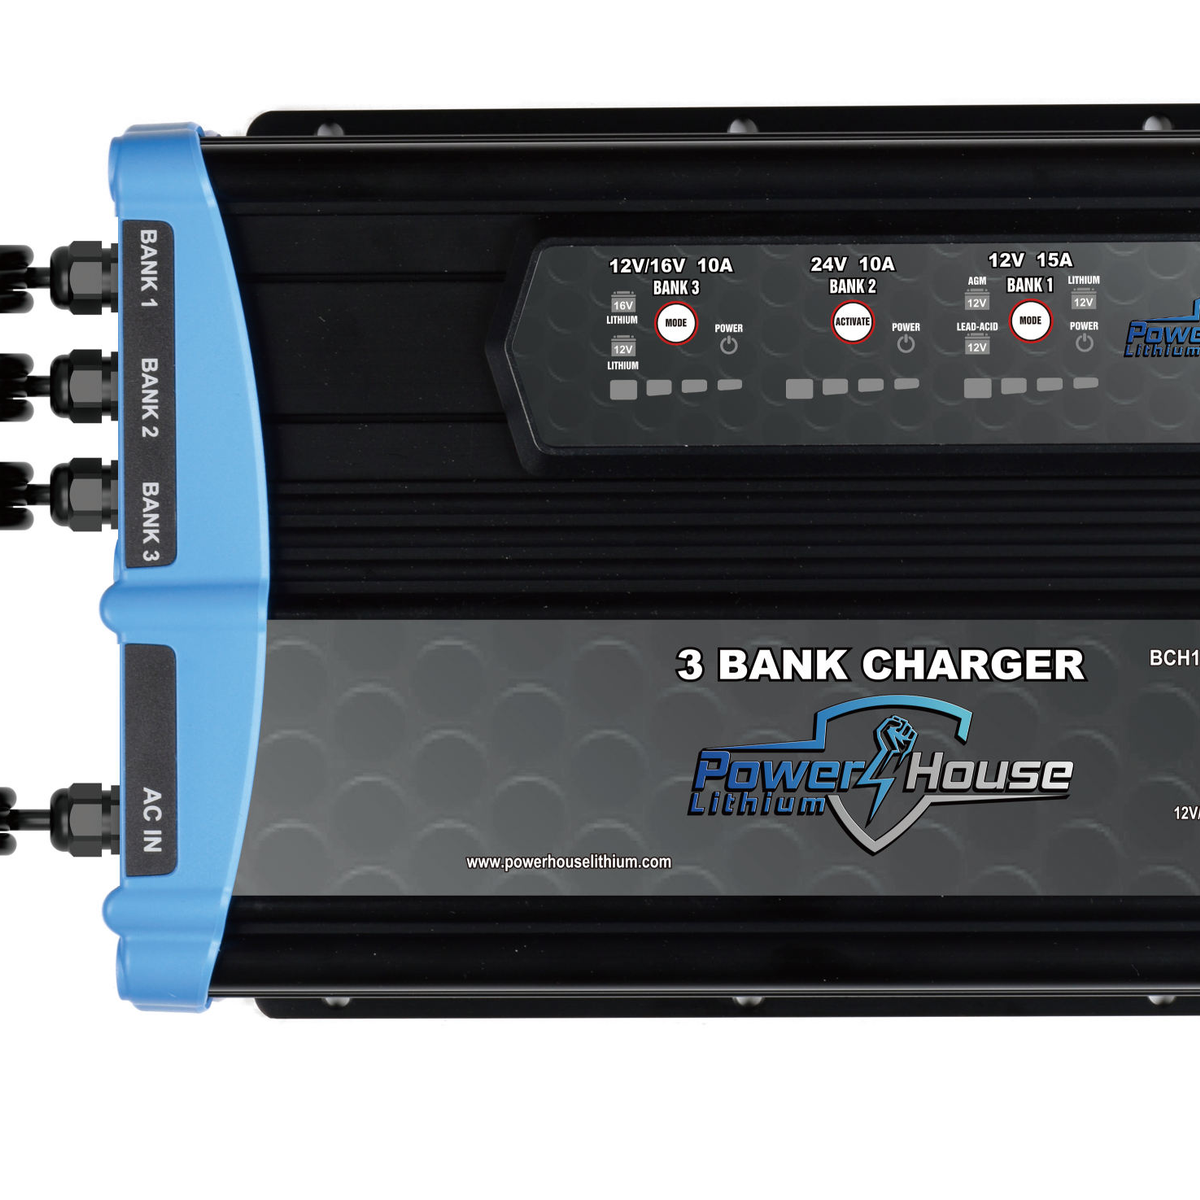 PowerHouse Lithium 12V/36V 2-Bank Waterproof Battery Charger